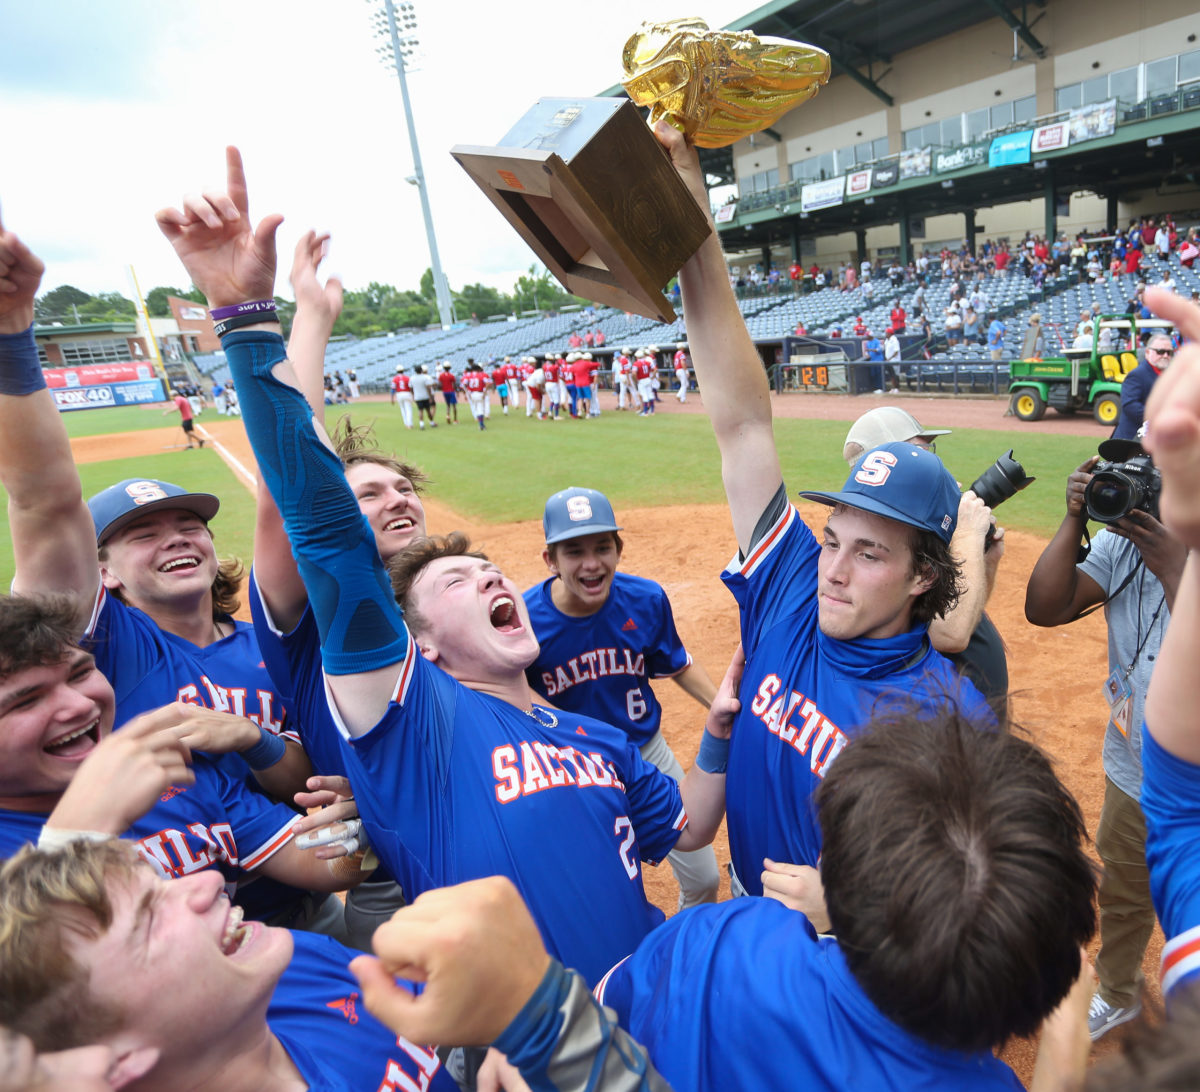 Saltillo's 2-1 championship series win over Pascagoula in the 5A baseball championship helped the Tigers to a share of the All-Sports title for 2020-2021.